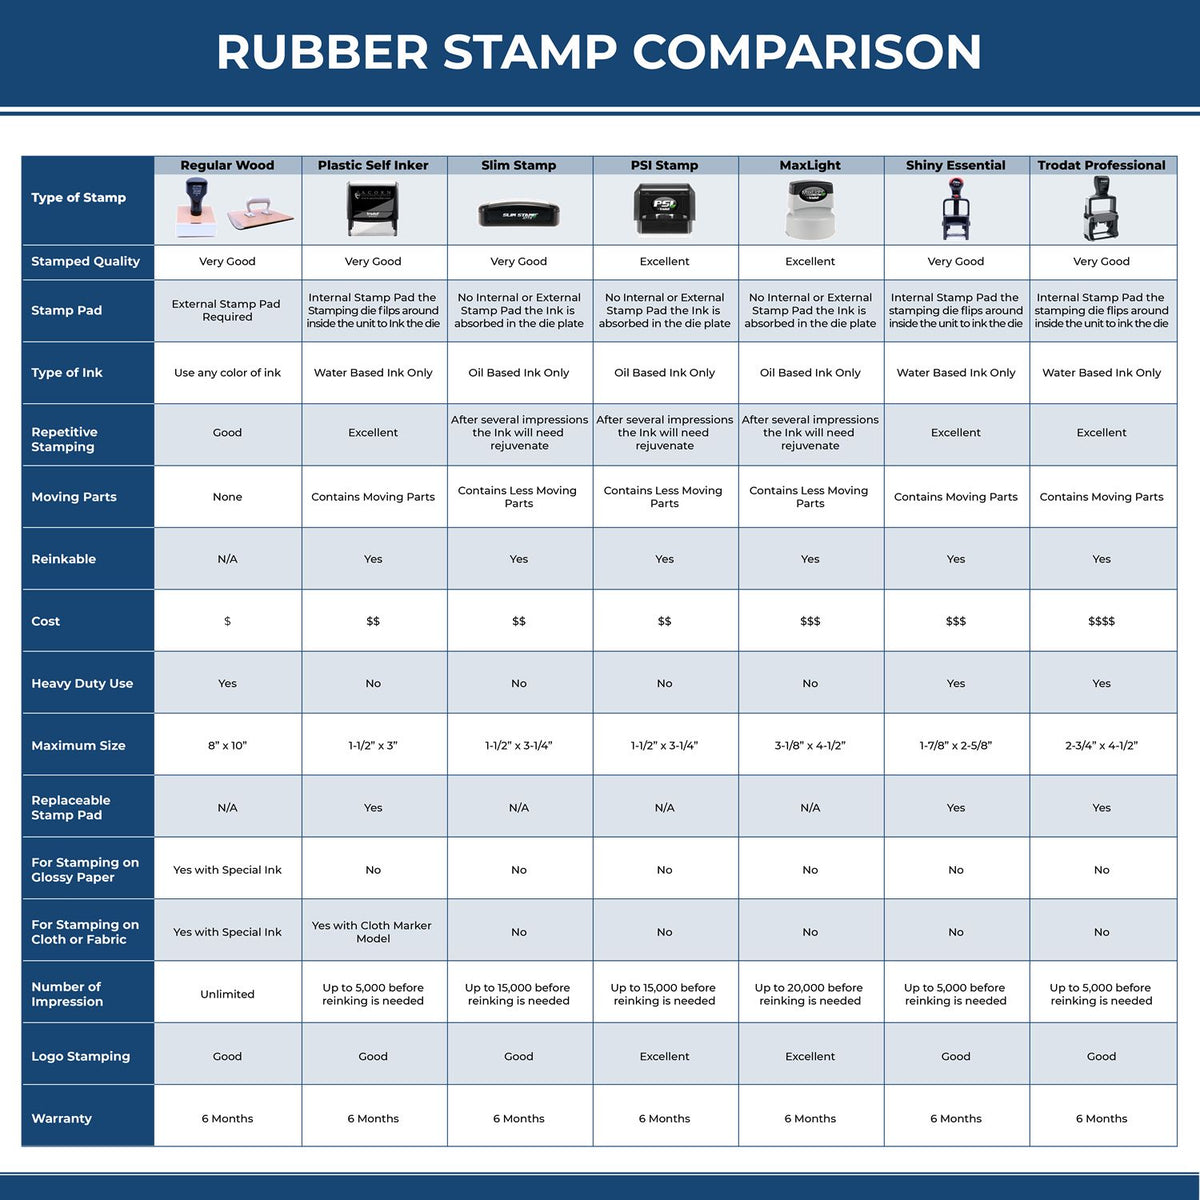 Large Confidential with Envelope Rubber Stamp 5645R Rubber Stamp Comparison